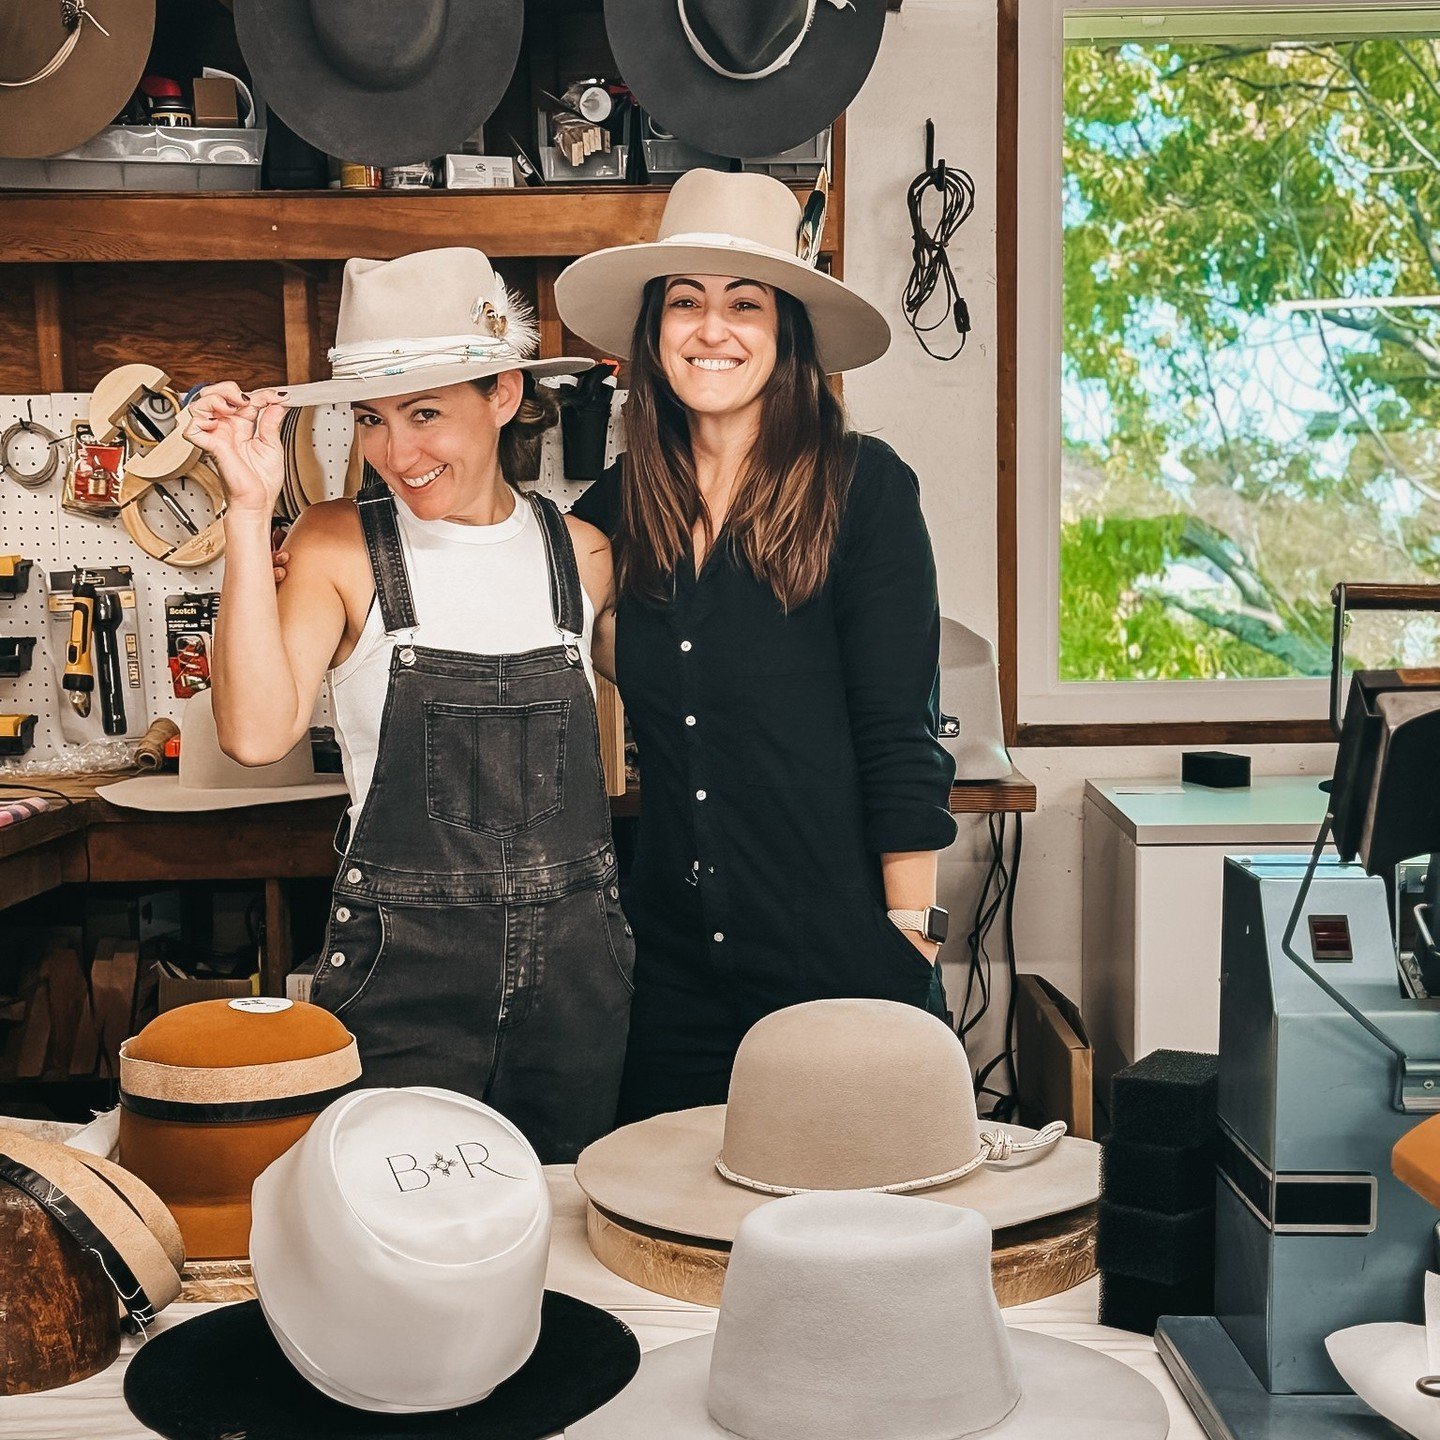 We had absolutely no fun in our shop today taking our raw hat bodies and blocking, shaping, sanding and ironing them for our hat line. #ourhappyplace #inthehatshop #handmadehats #brimroadhats